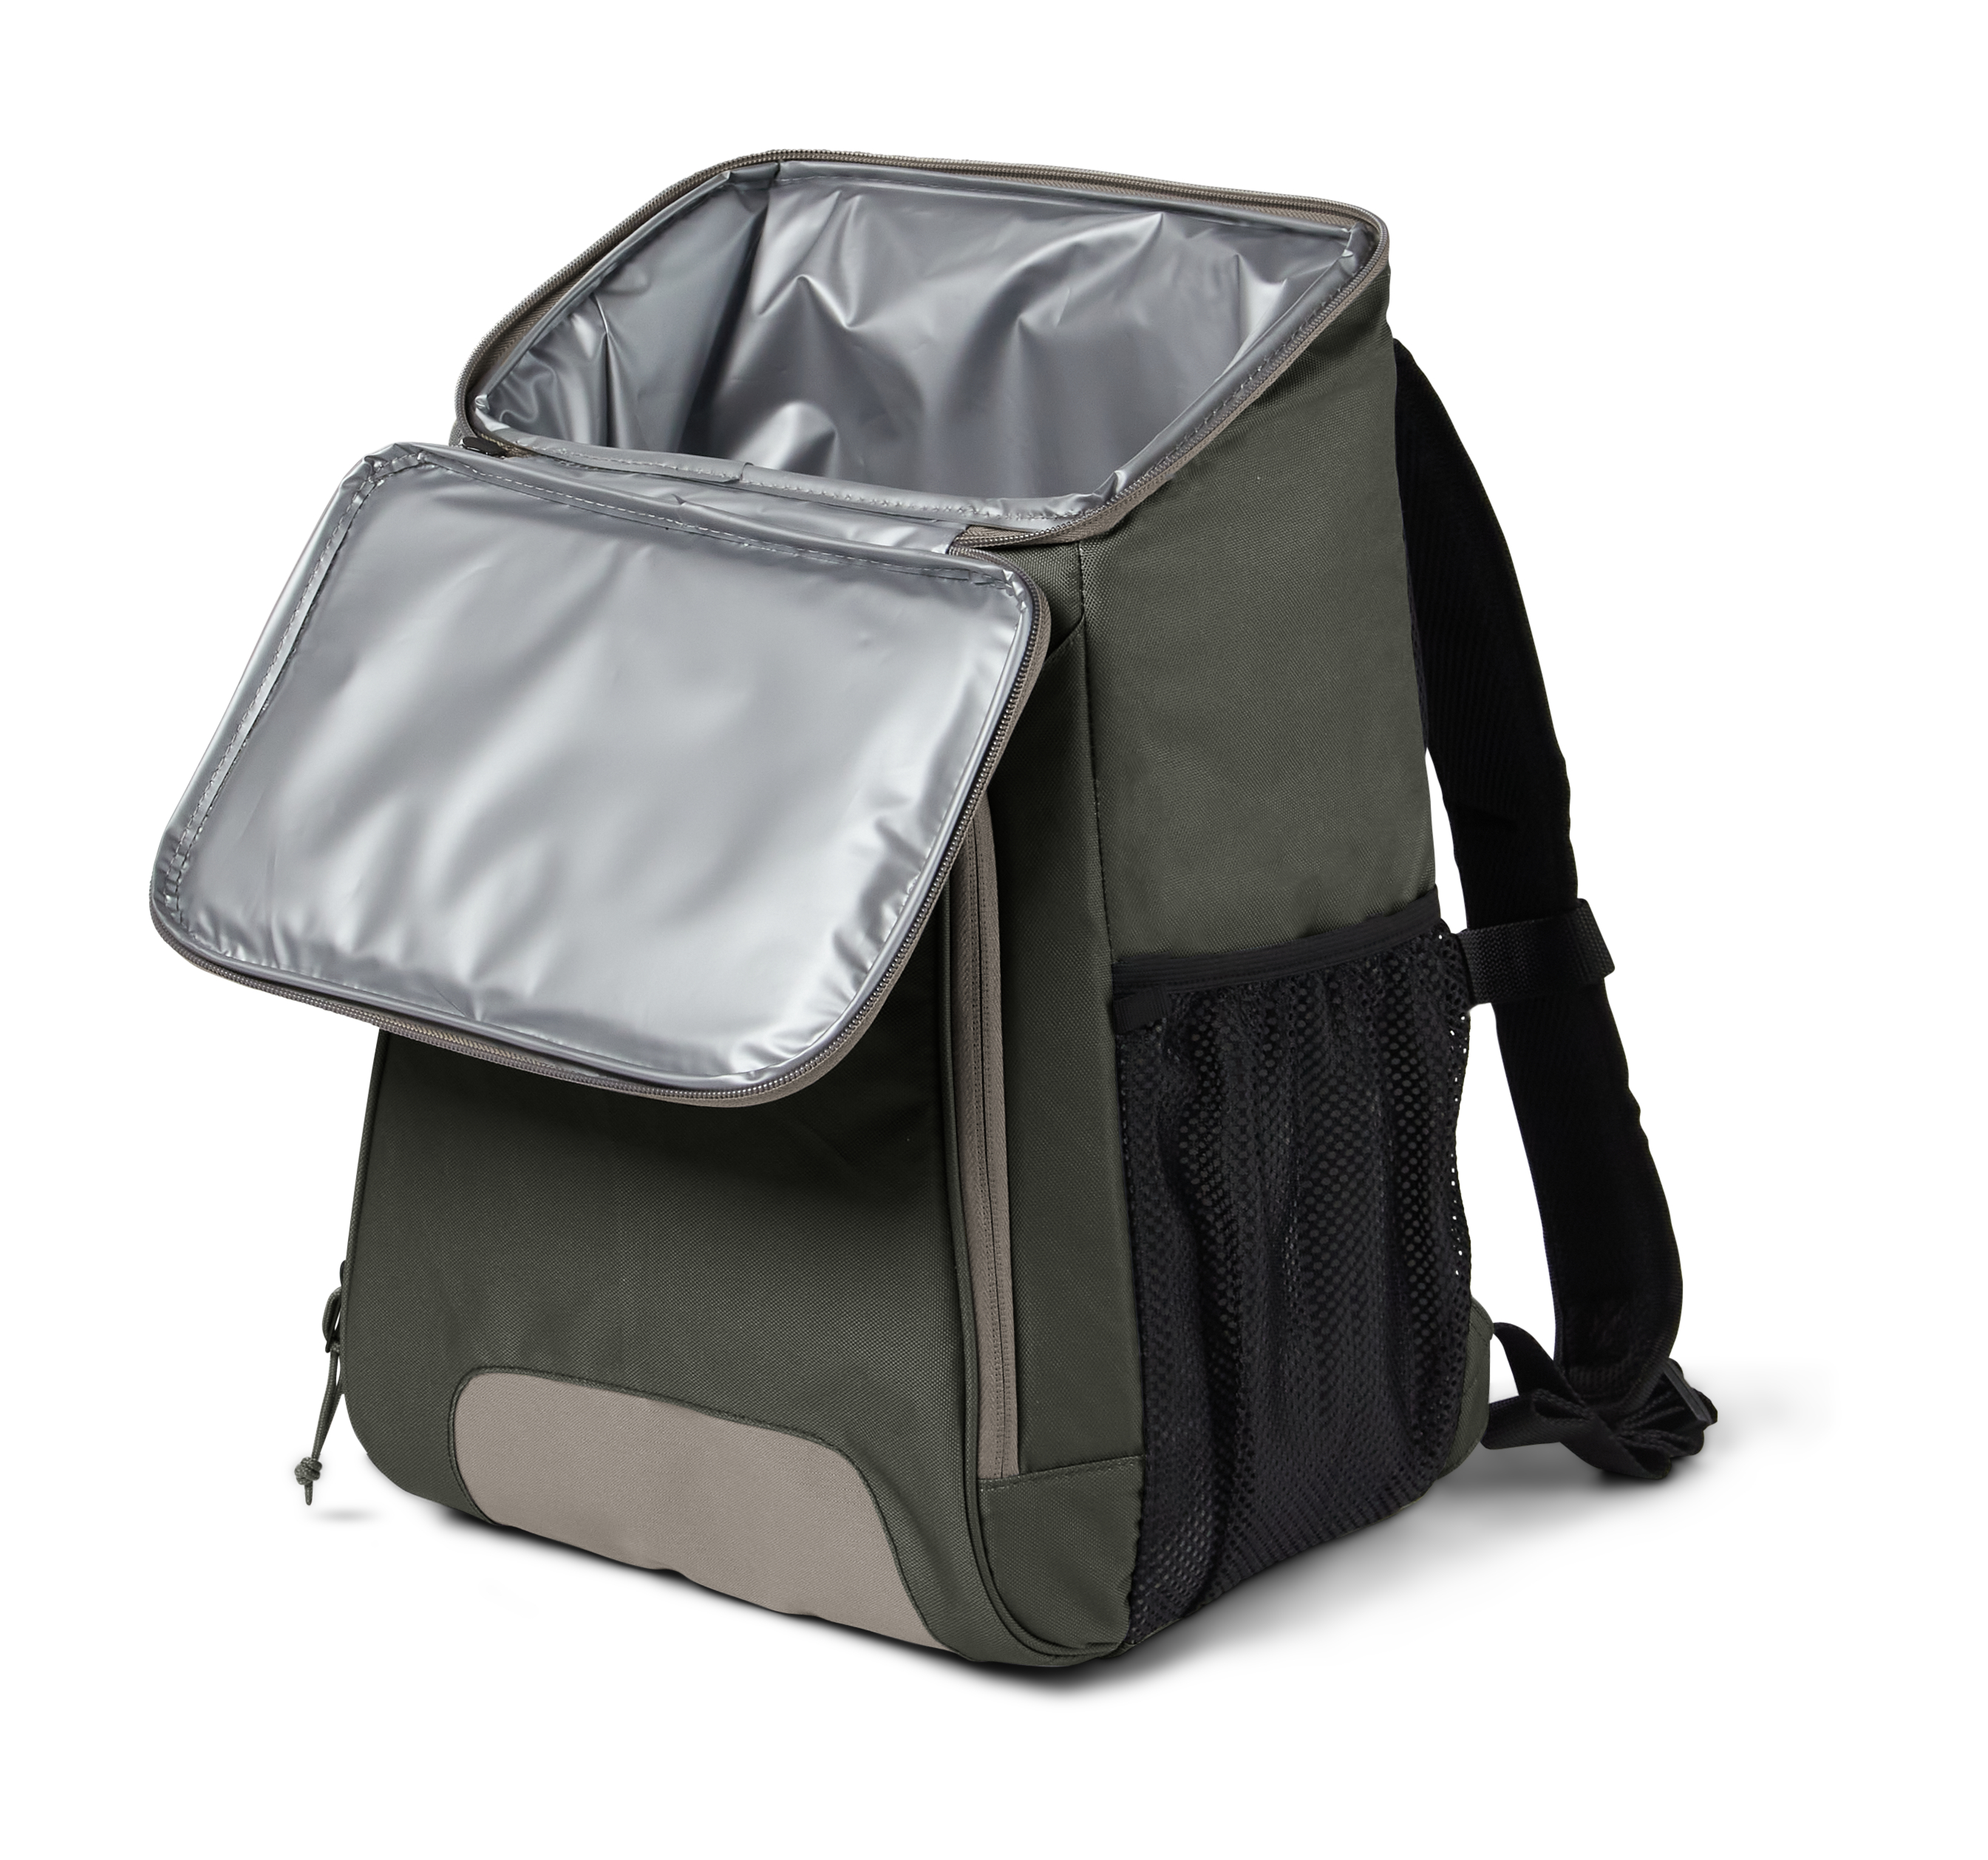 Igloo 24 cans Topgrip Soft Sided Cooler Backpack, Green - image 2 of 9